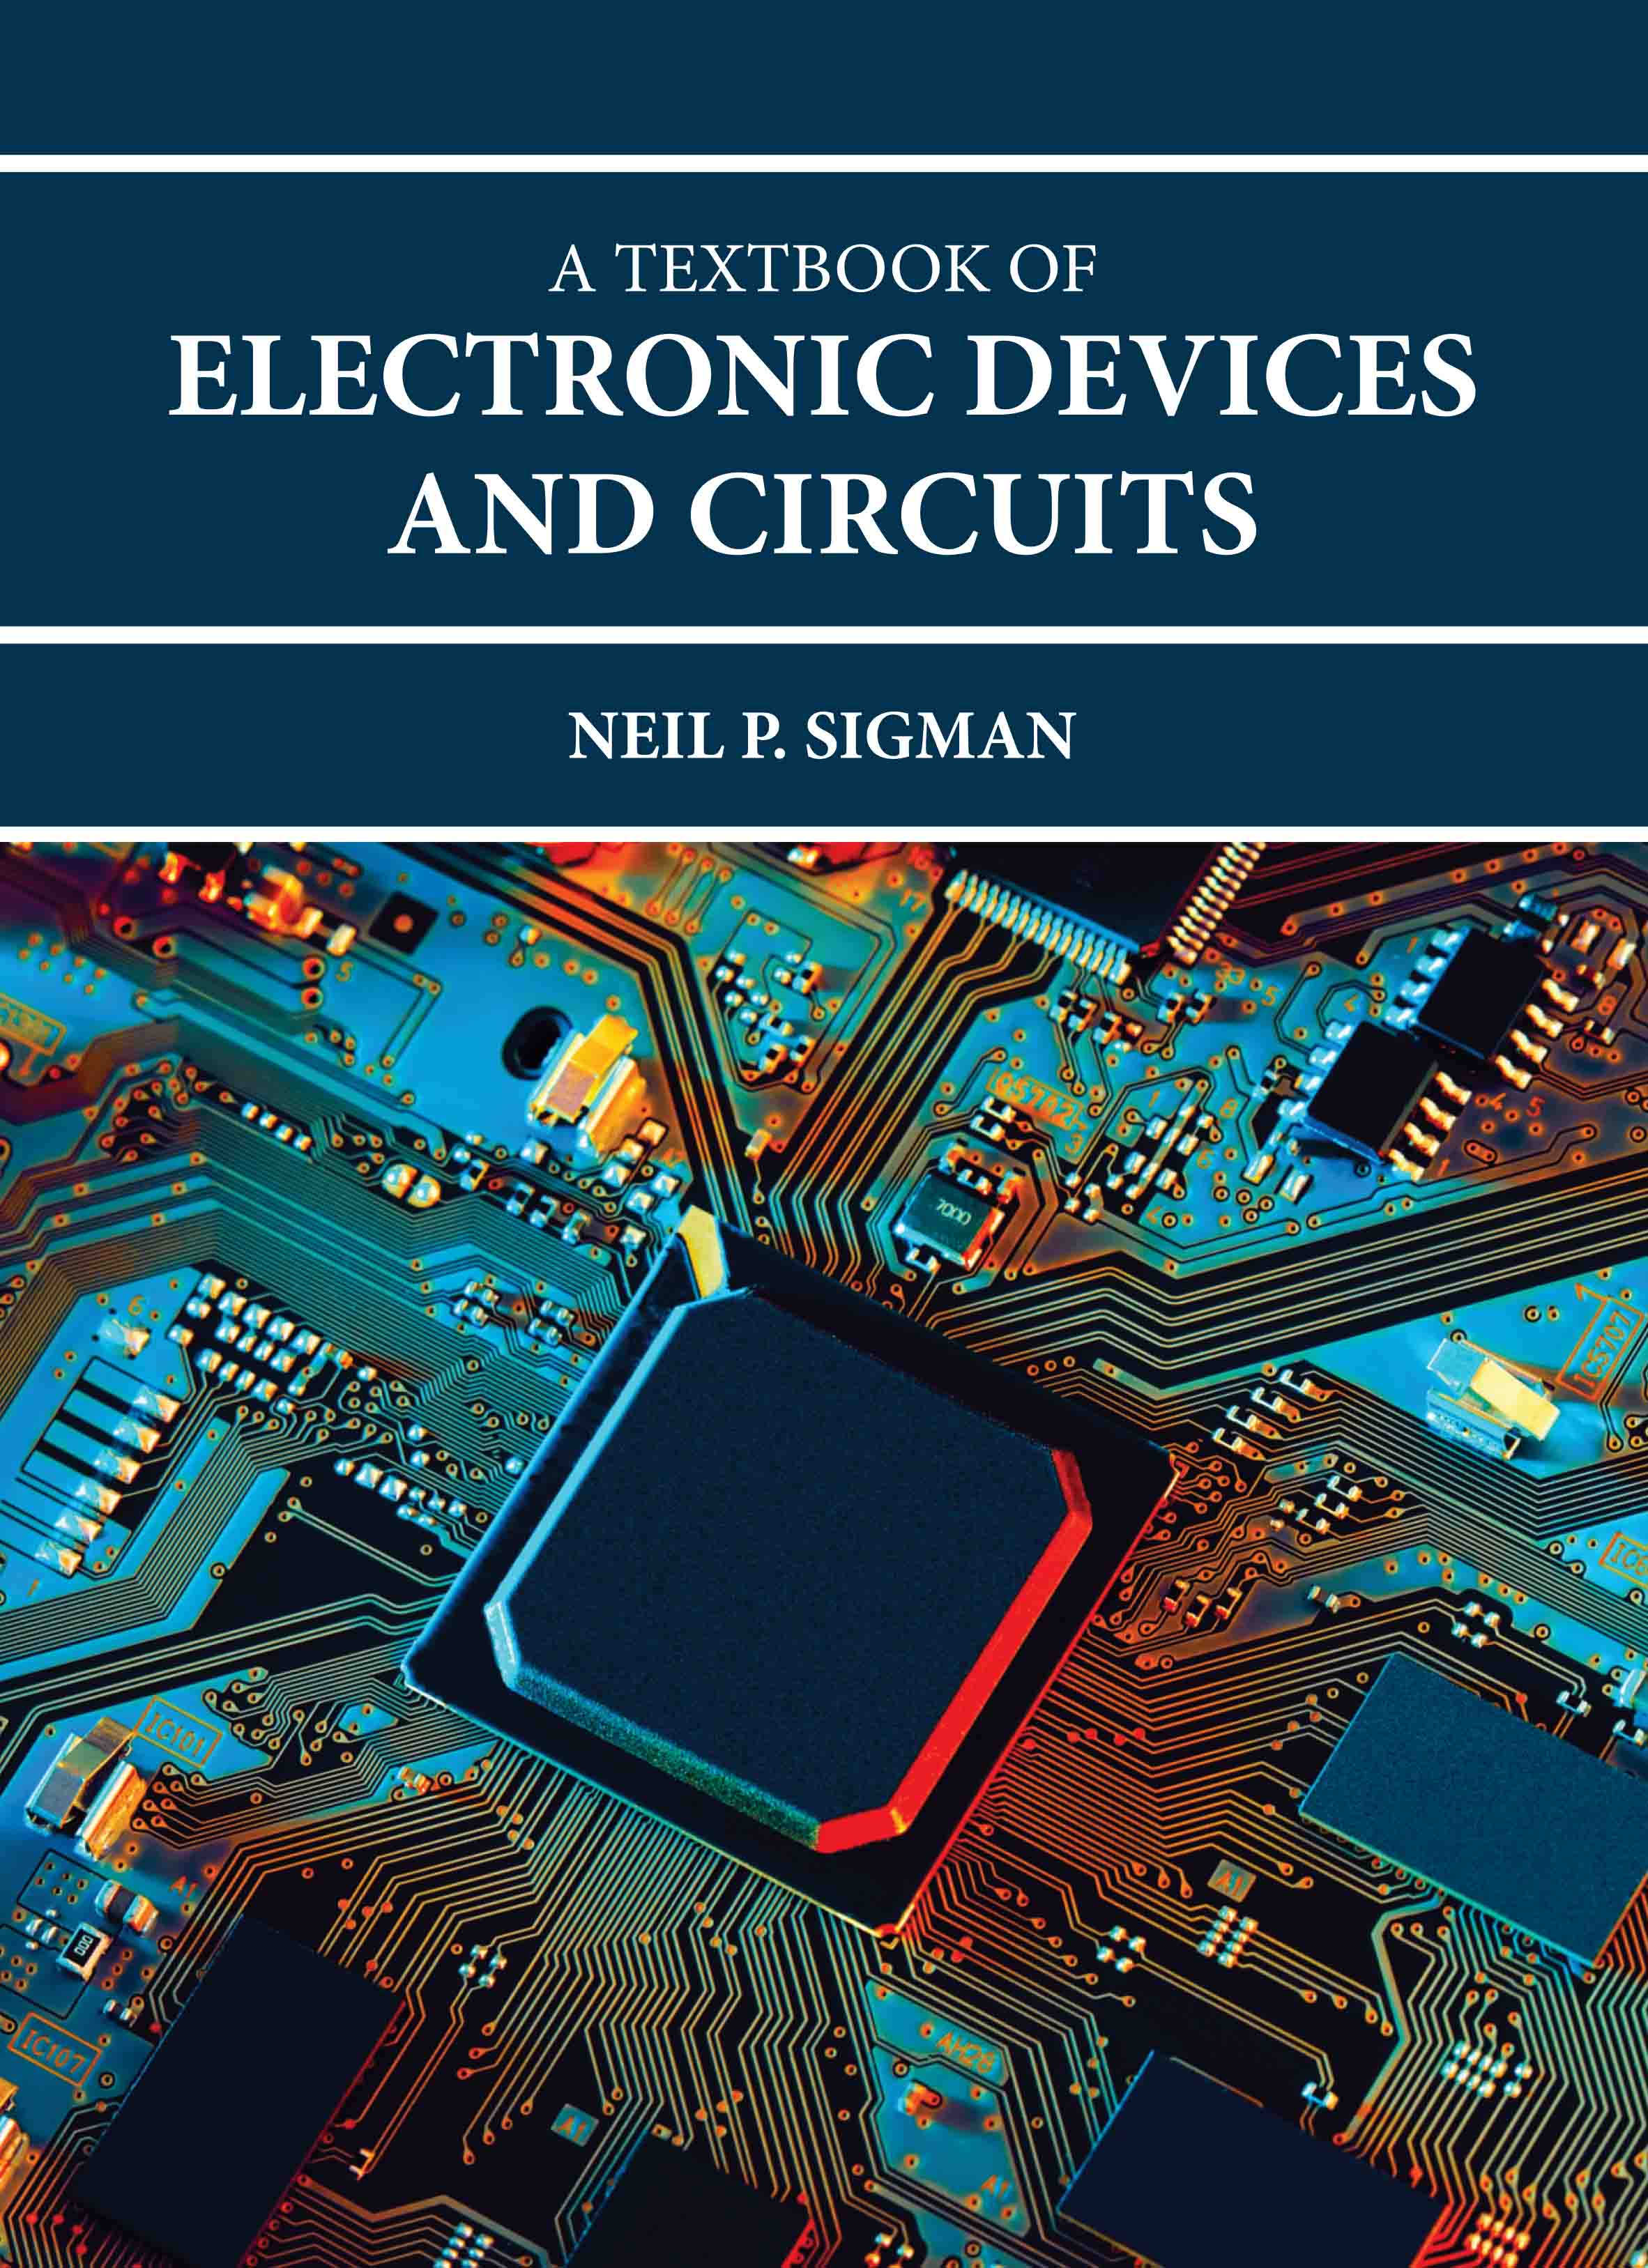 A Textbook of Electronic Devices and Circuits